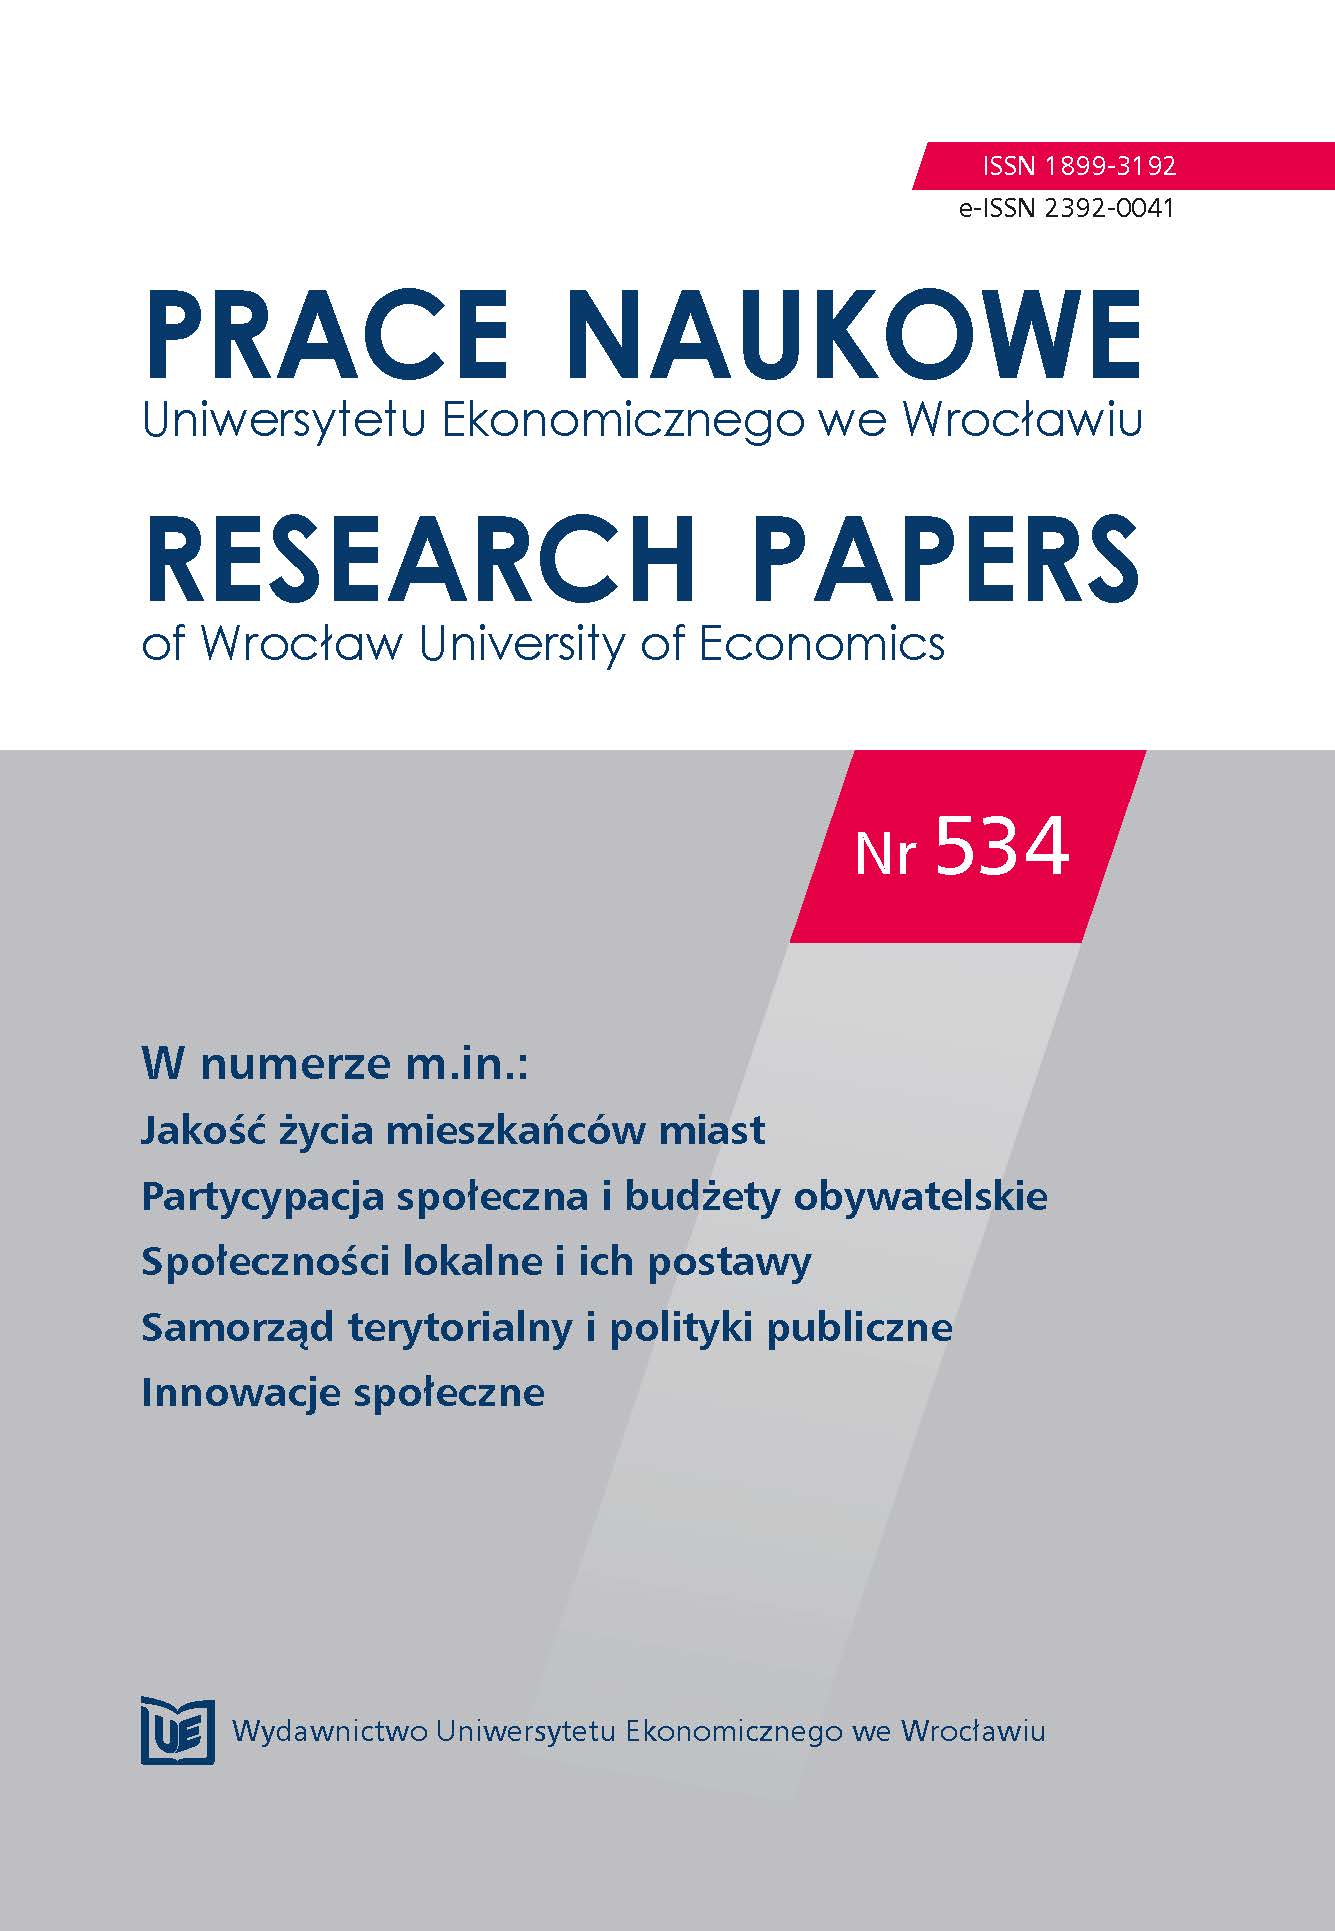 Rural funerals – yesterday and nowodays (basing on the example of the village of Smardzów) Cover Image